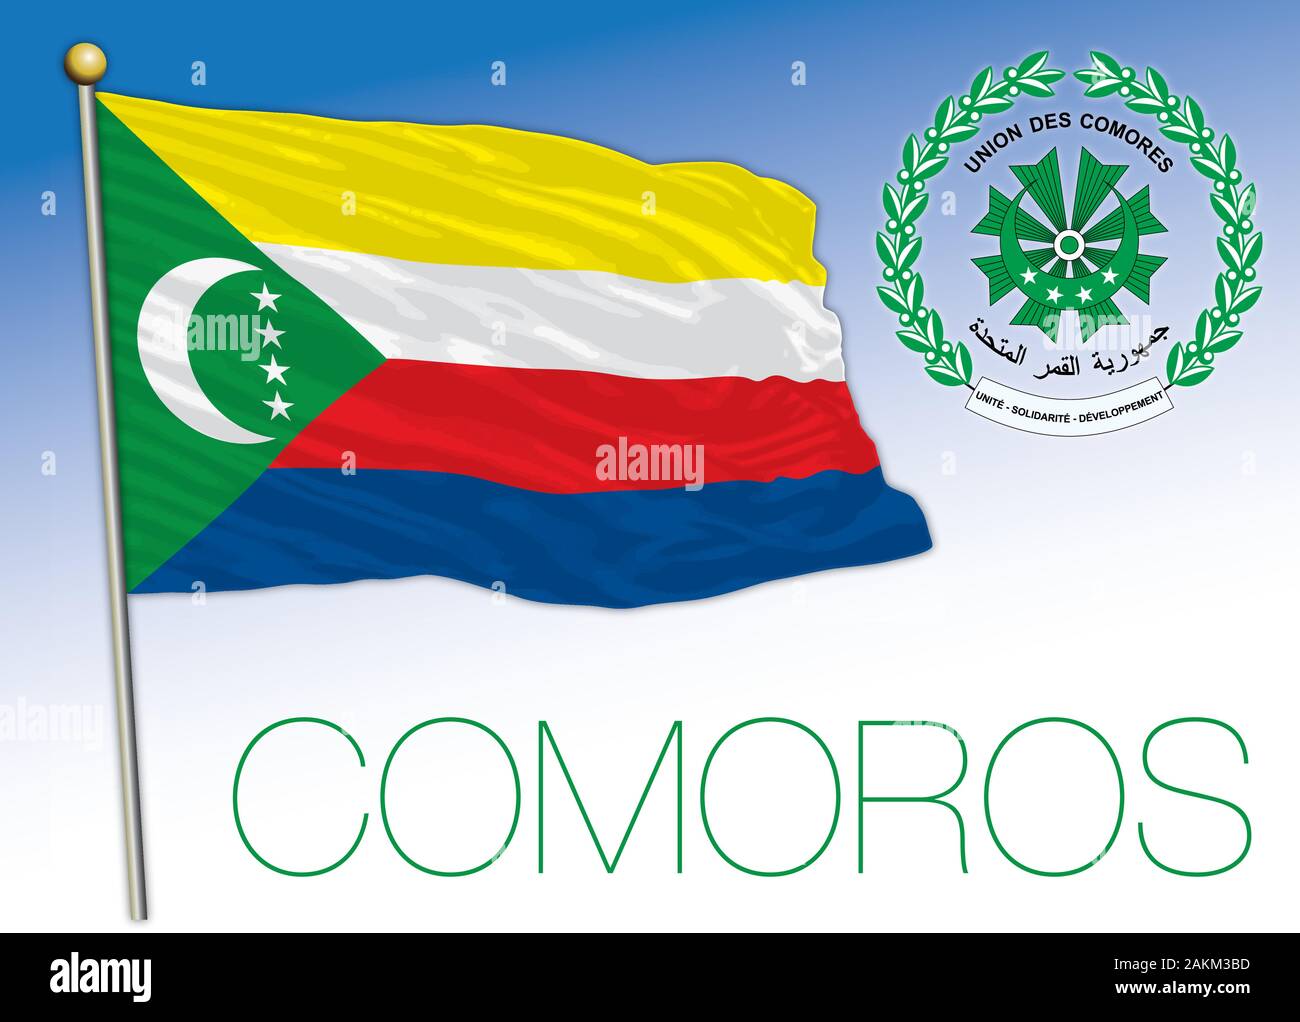 Comoros islands community official flag and coat of arms, vector illustration Stock Vector